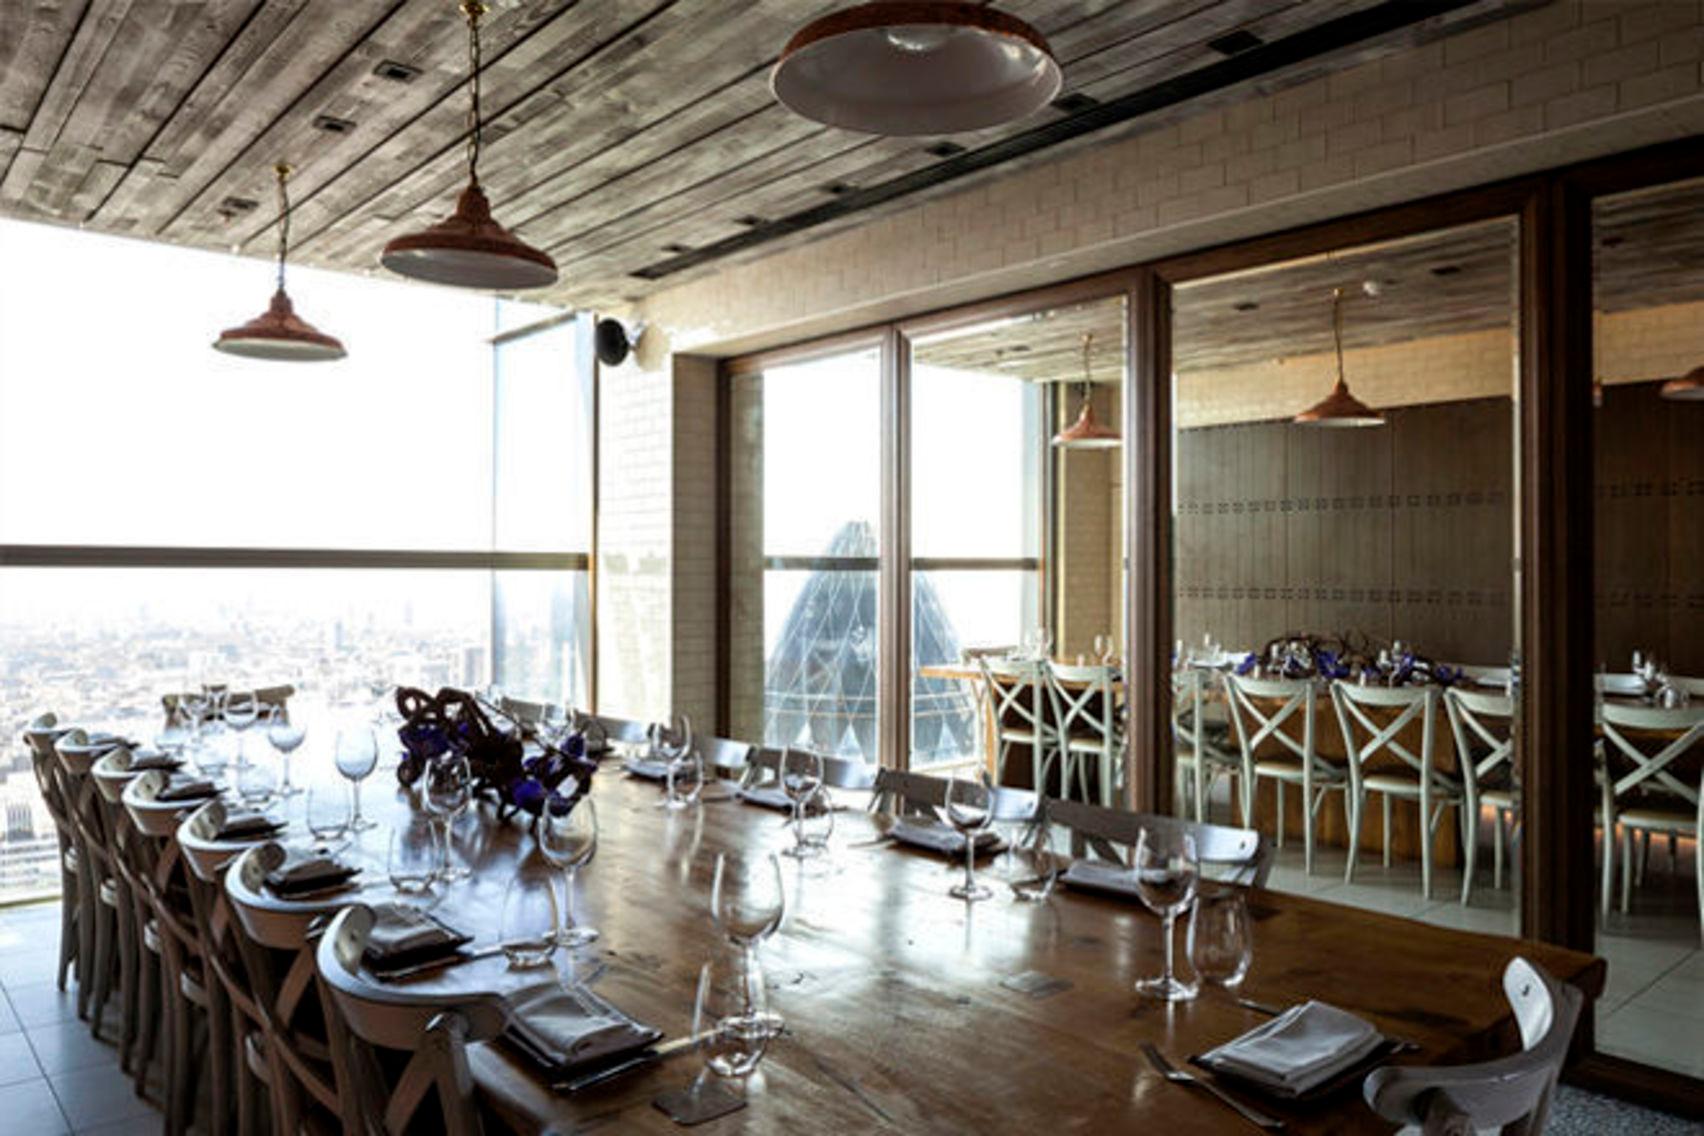 Private Dining Room - Brunch, Duck & Waffle photo #1